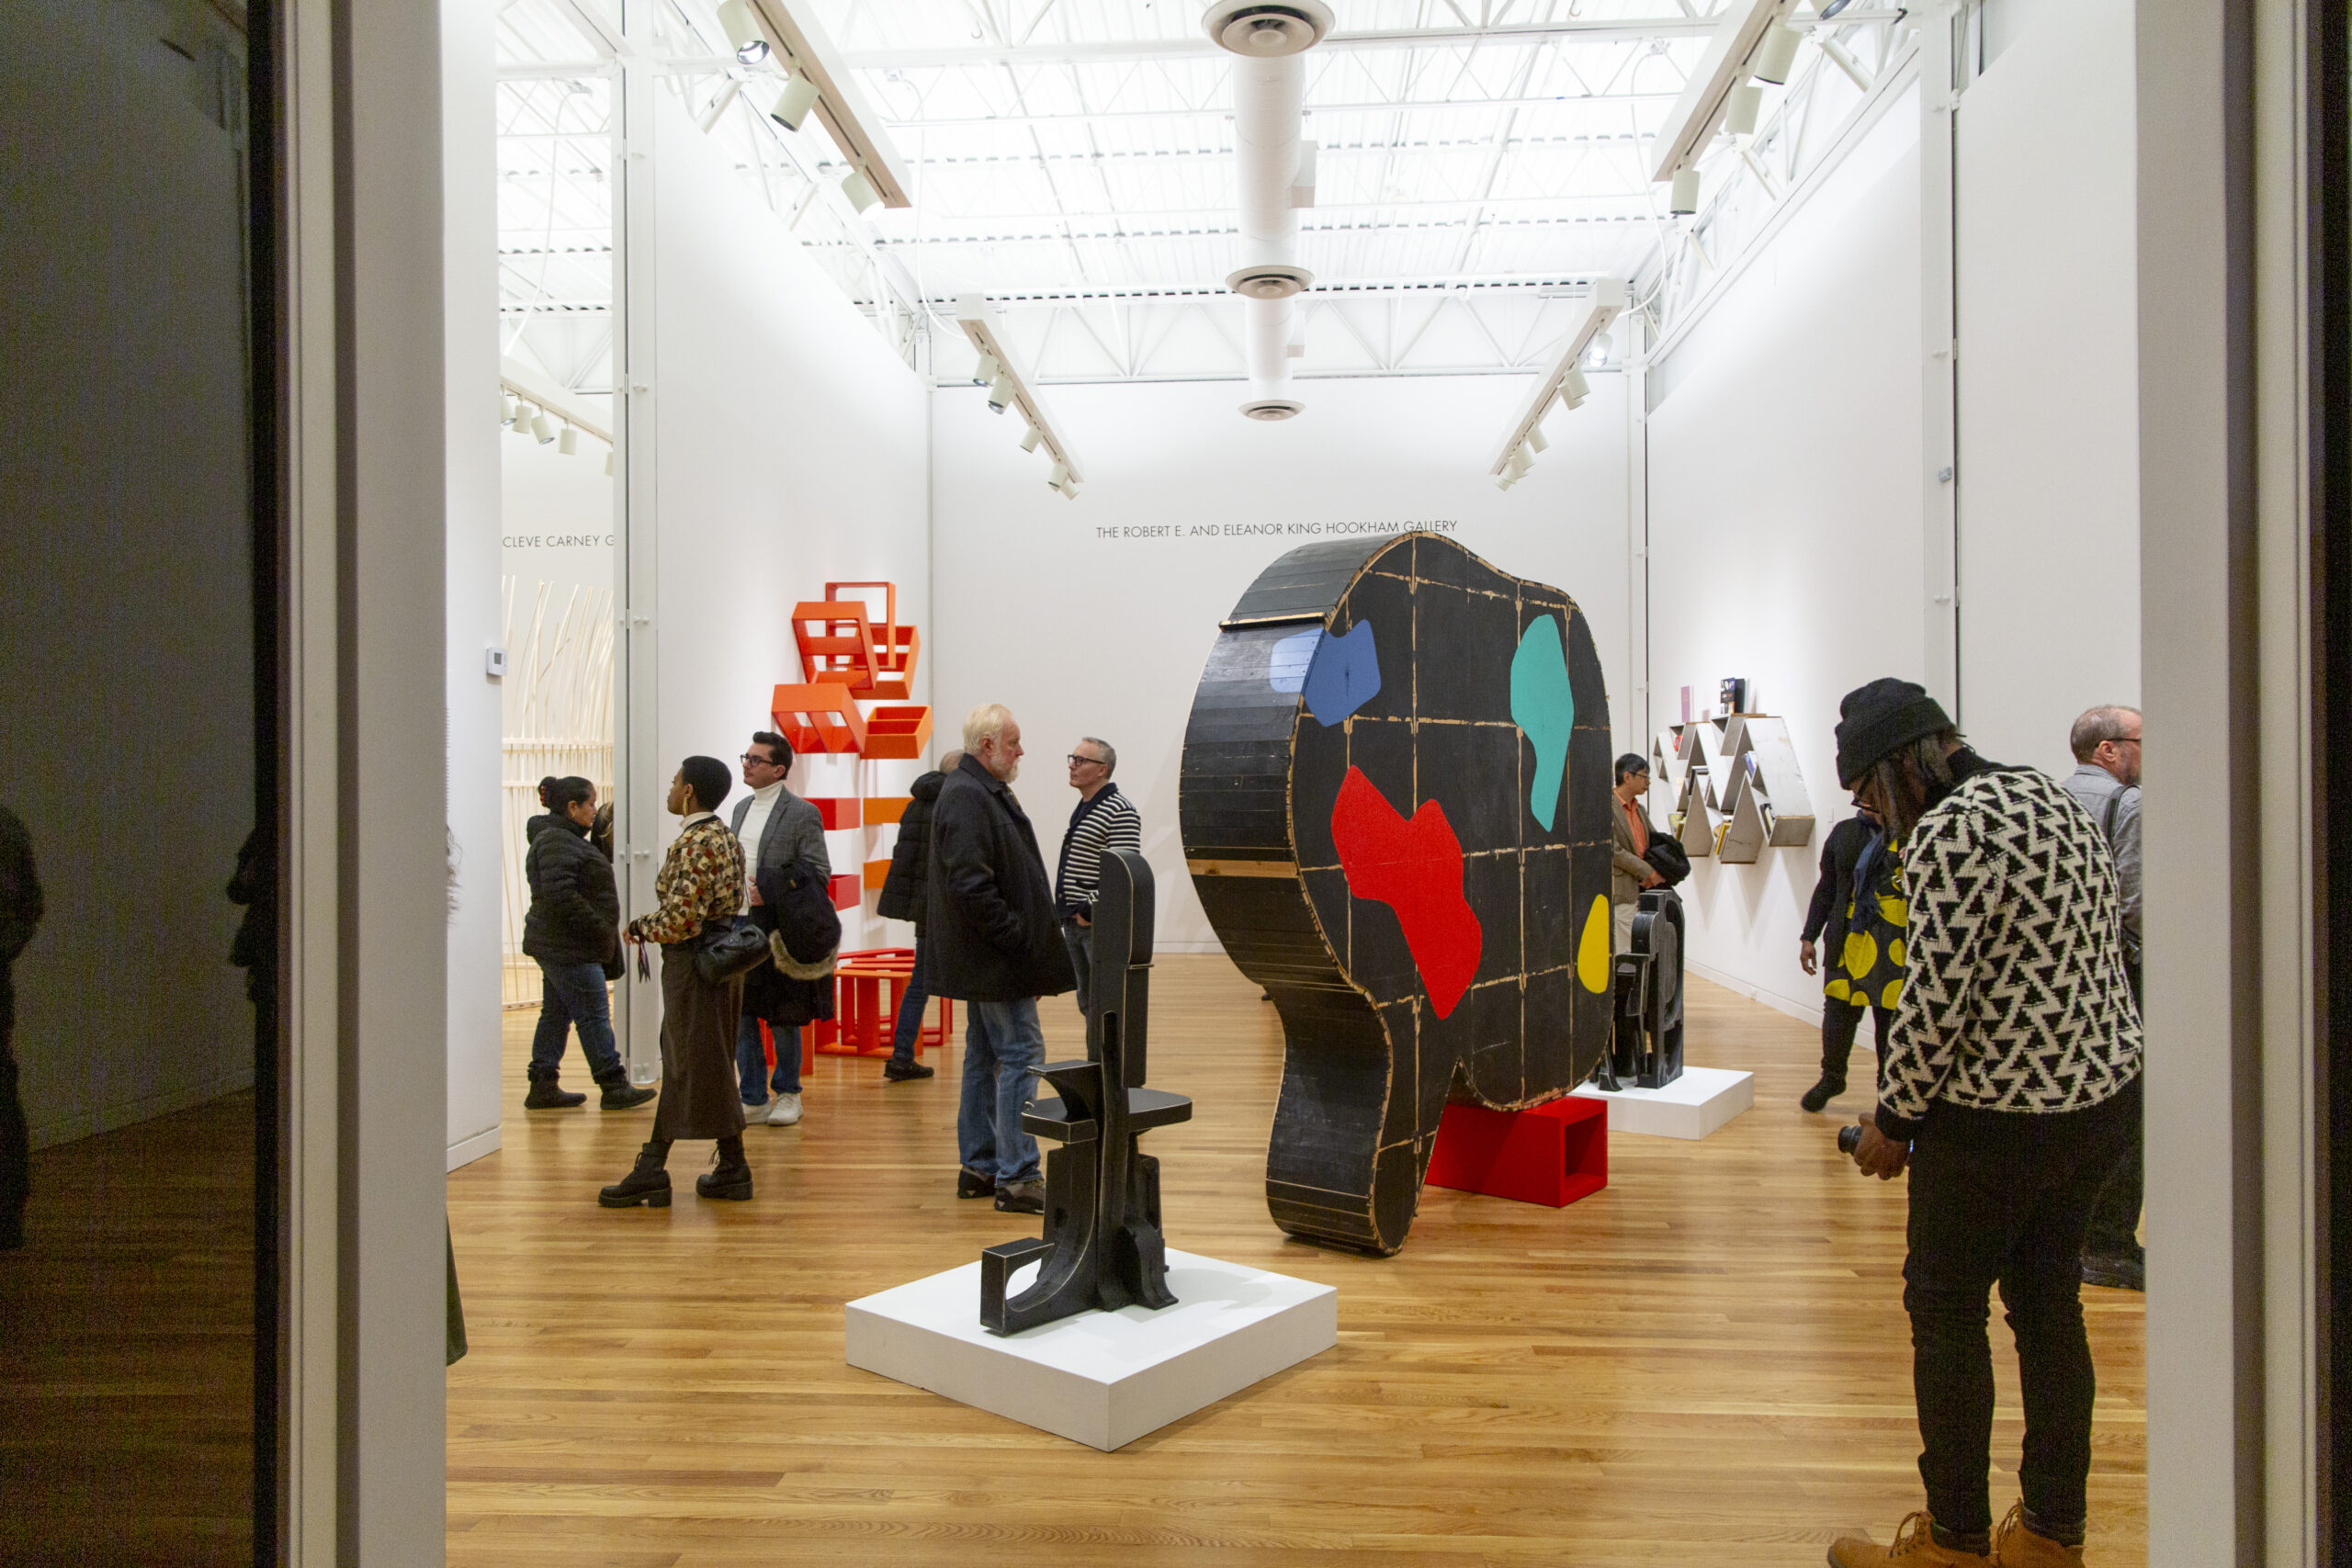 Crowd of people surround large designed objects in white open gallery.